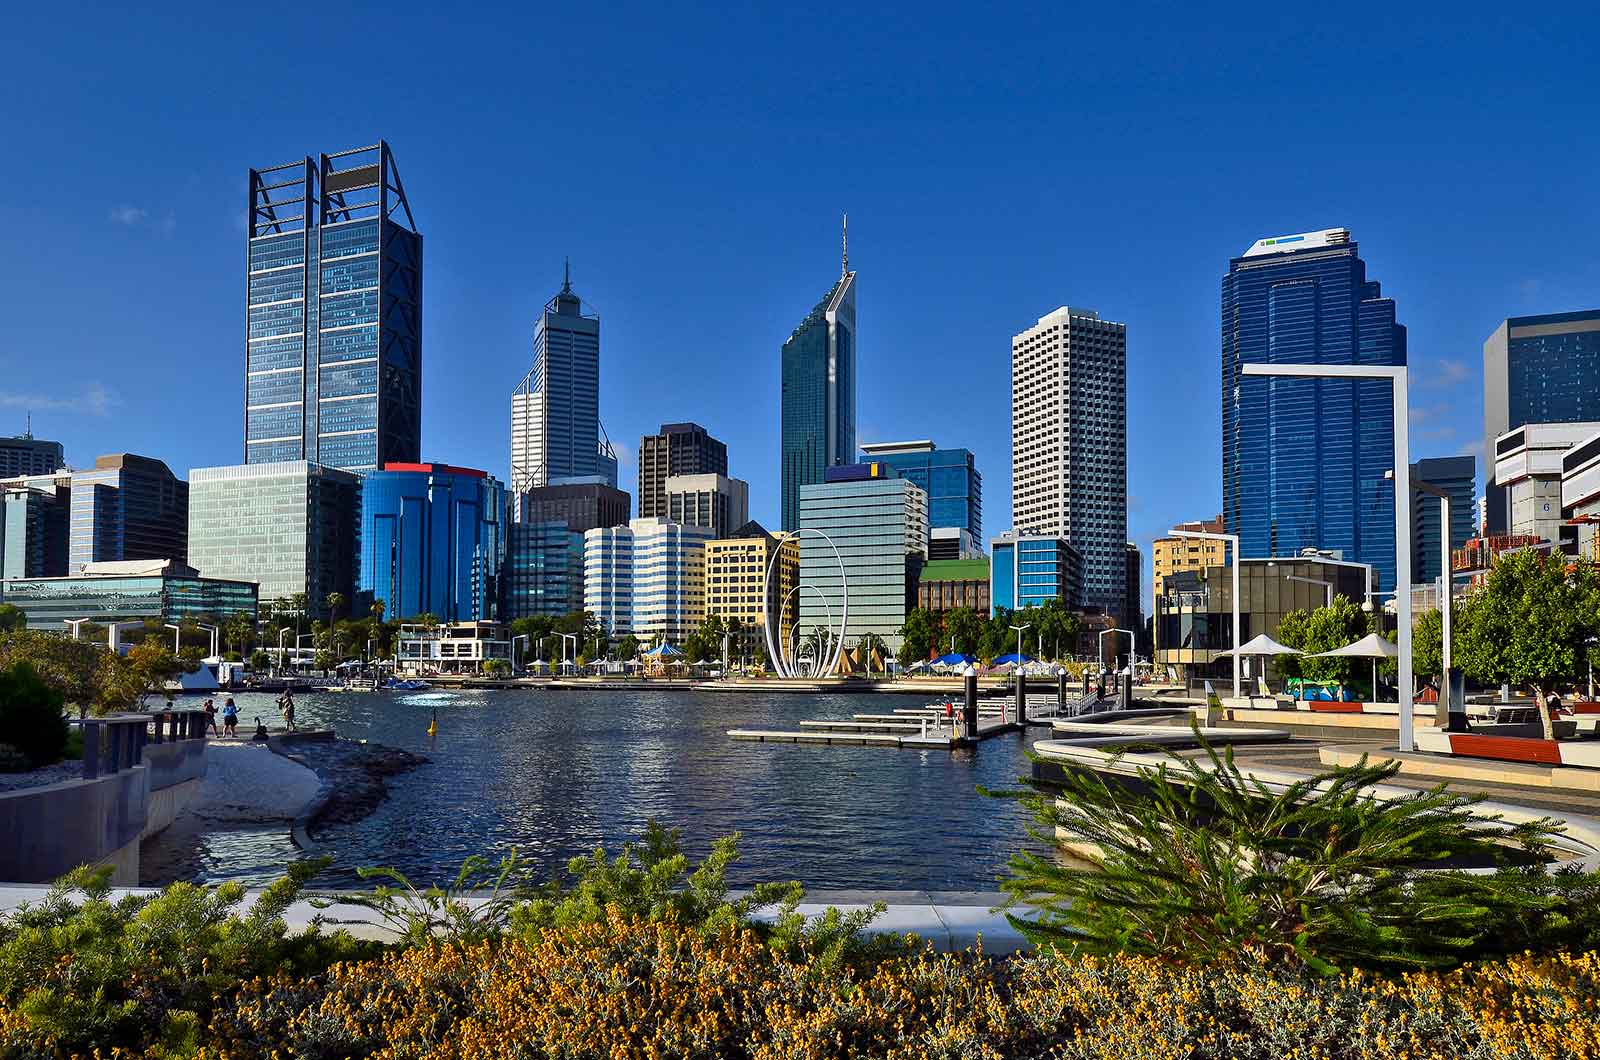 A photo of Perth, where copywriting and content marketing company Typeset has an office.